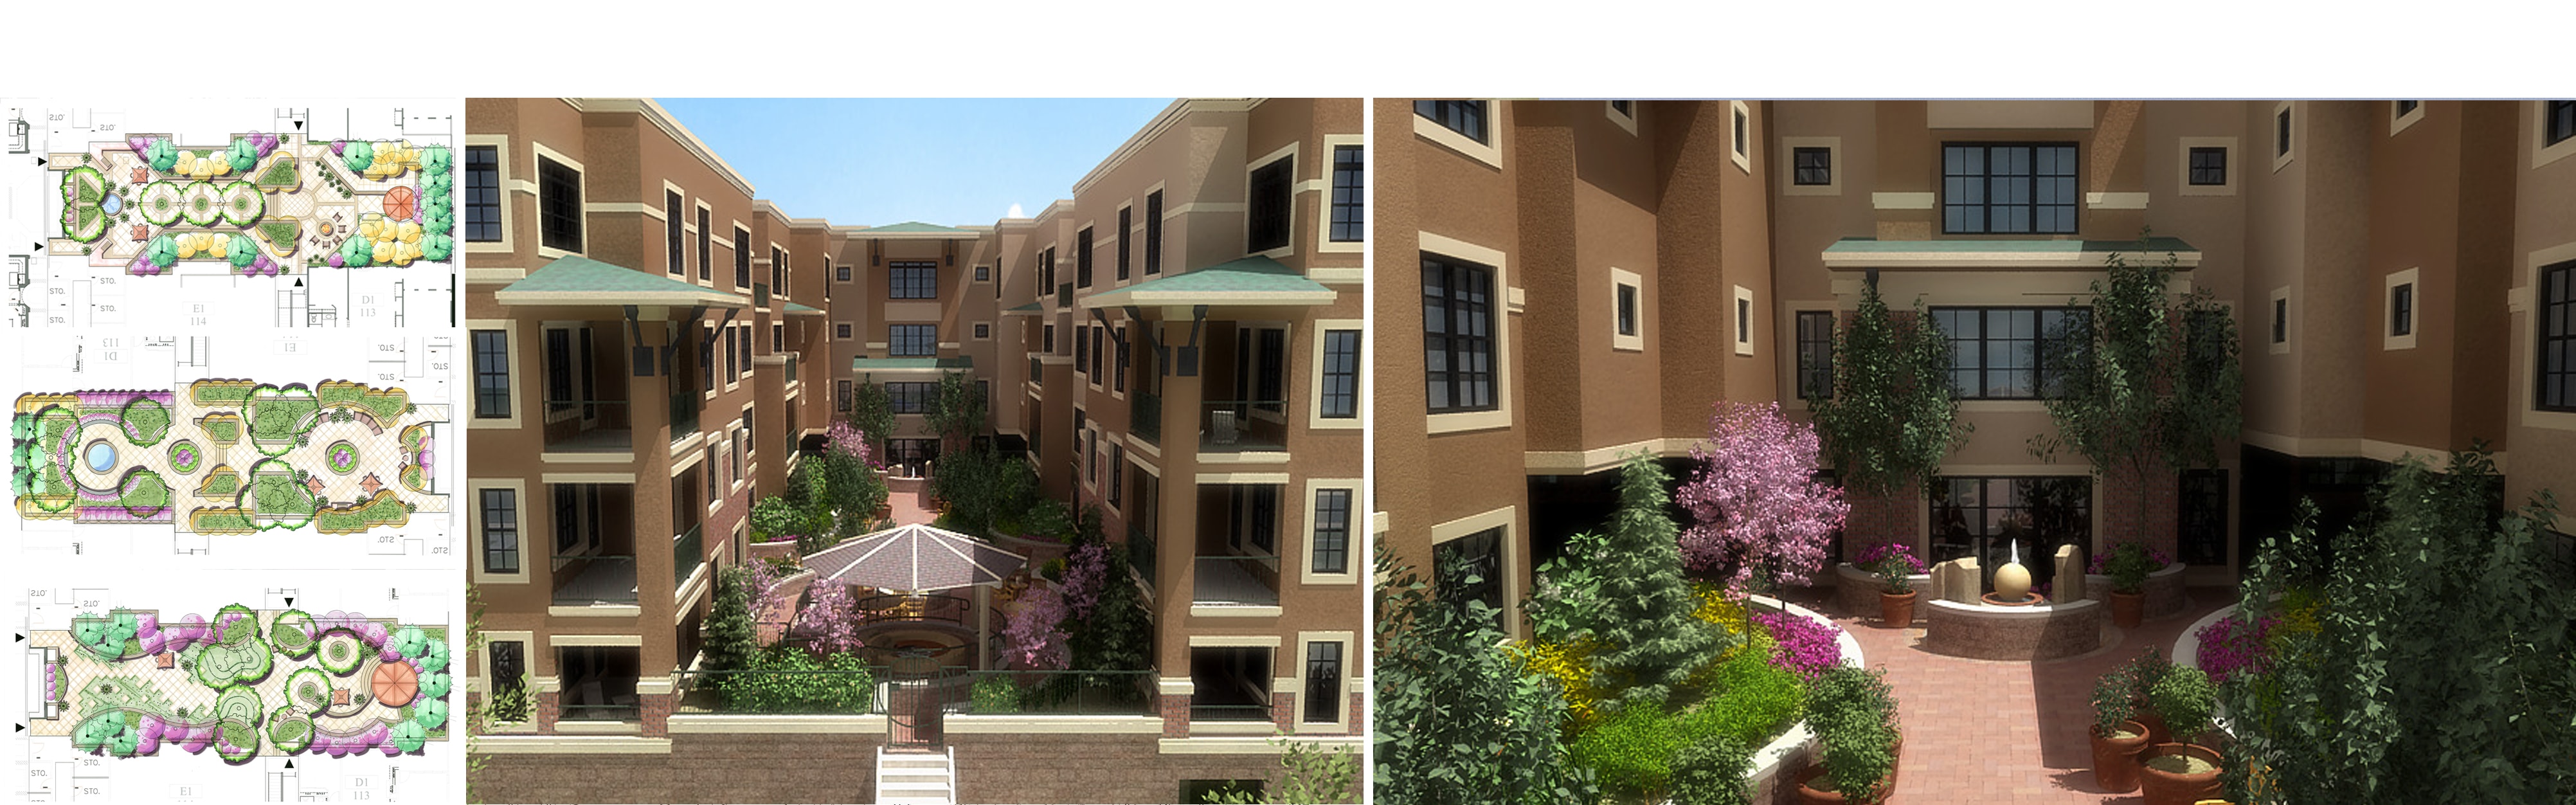 Multi-Family architecture solution provided from an architecture firm located in Colorado